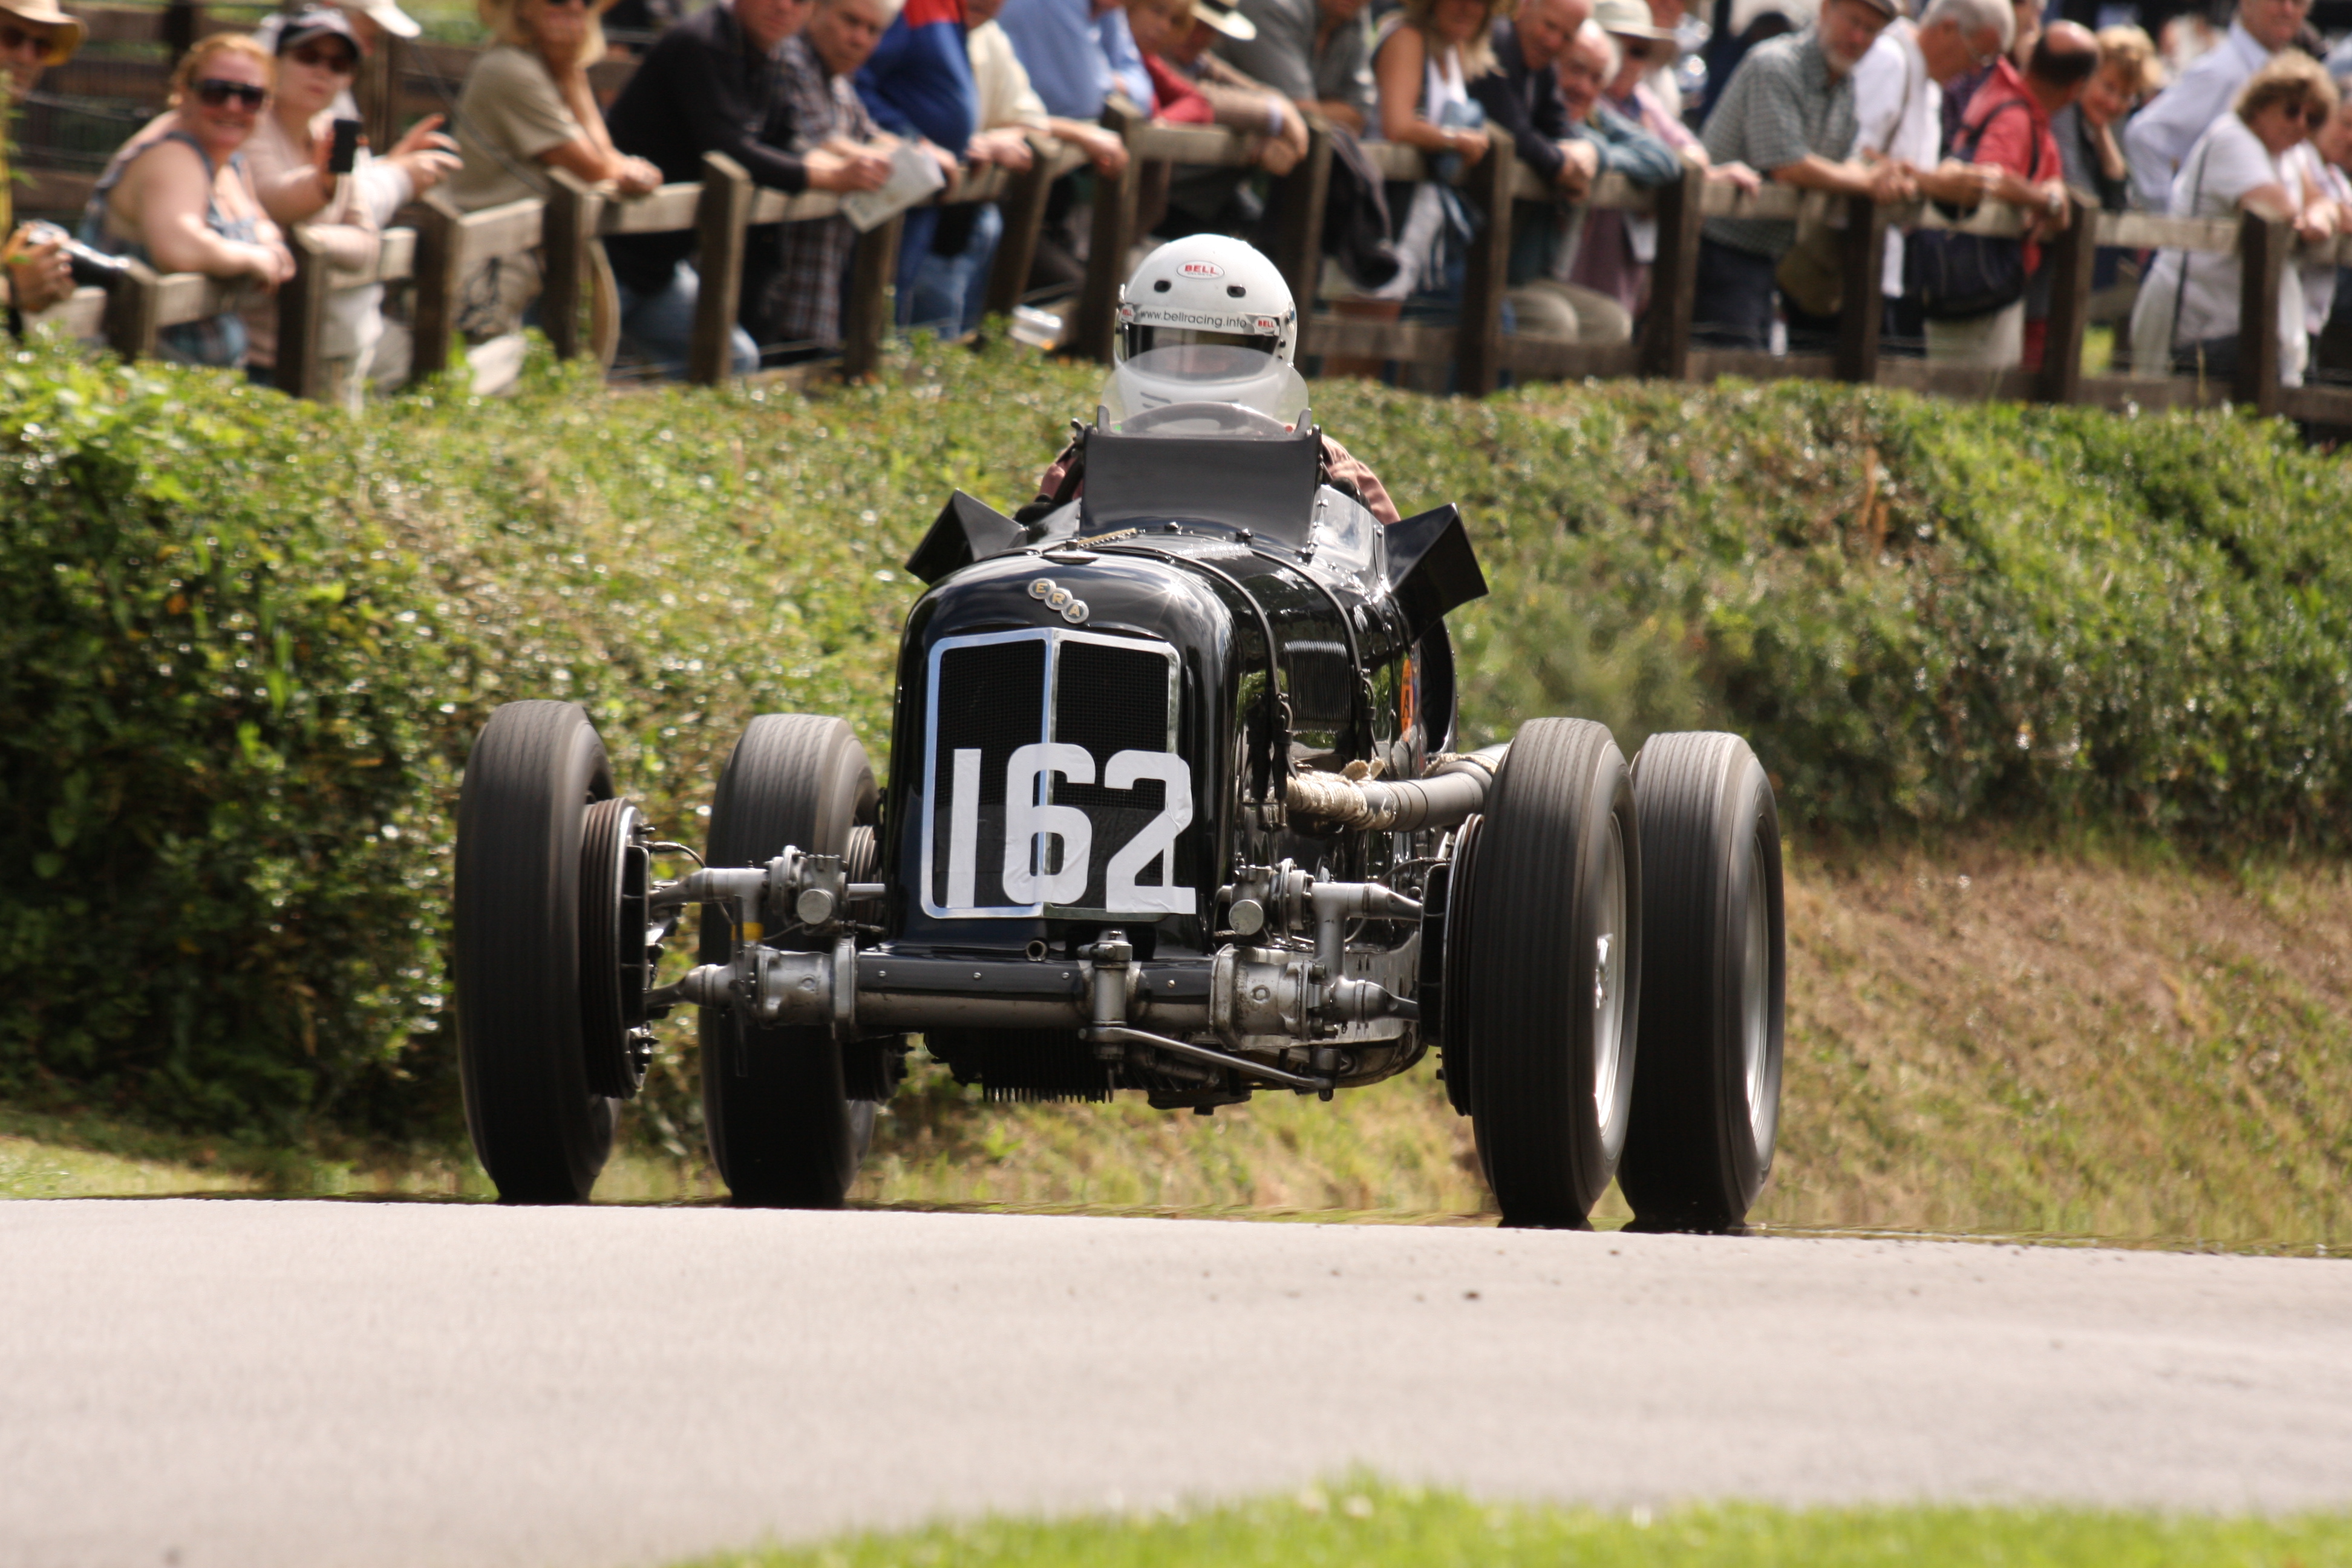 ERA R4D to headline another ‘Vintage’ day at Shelsley Walsh this weekend cover